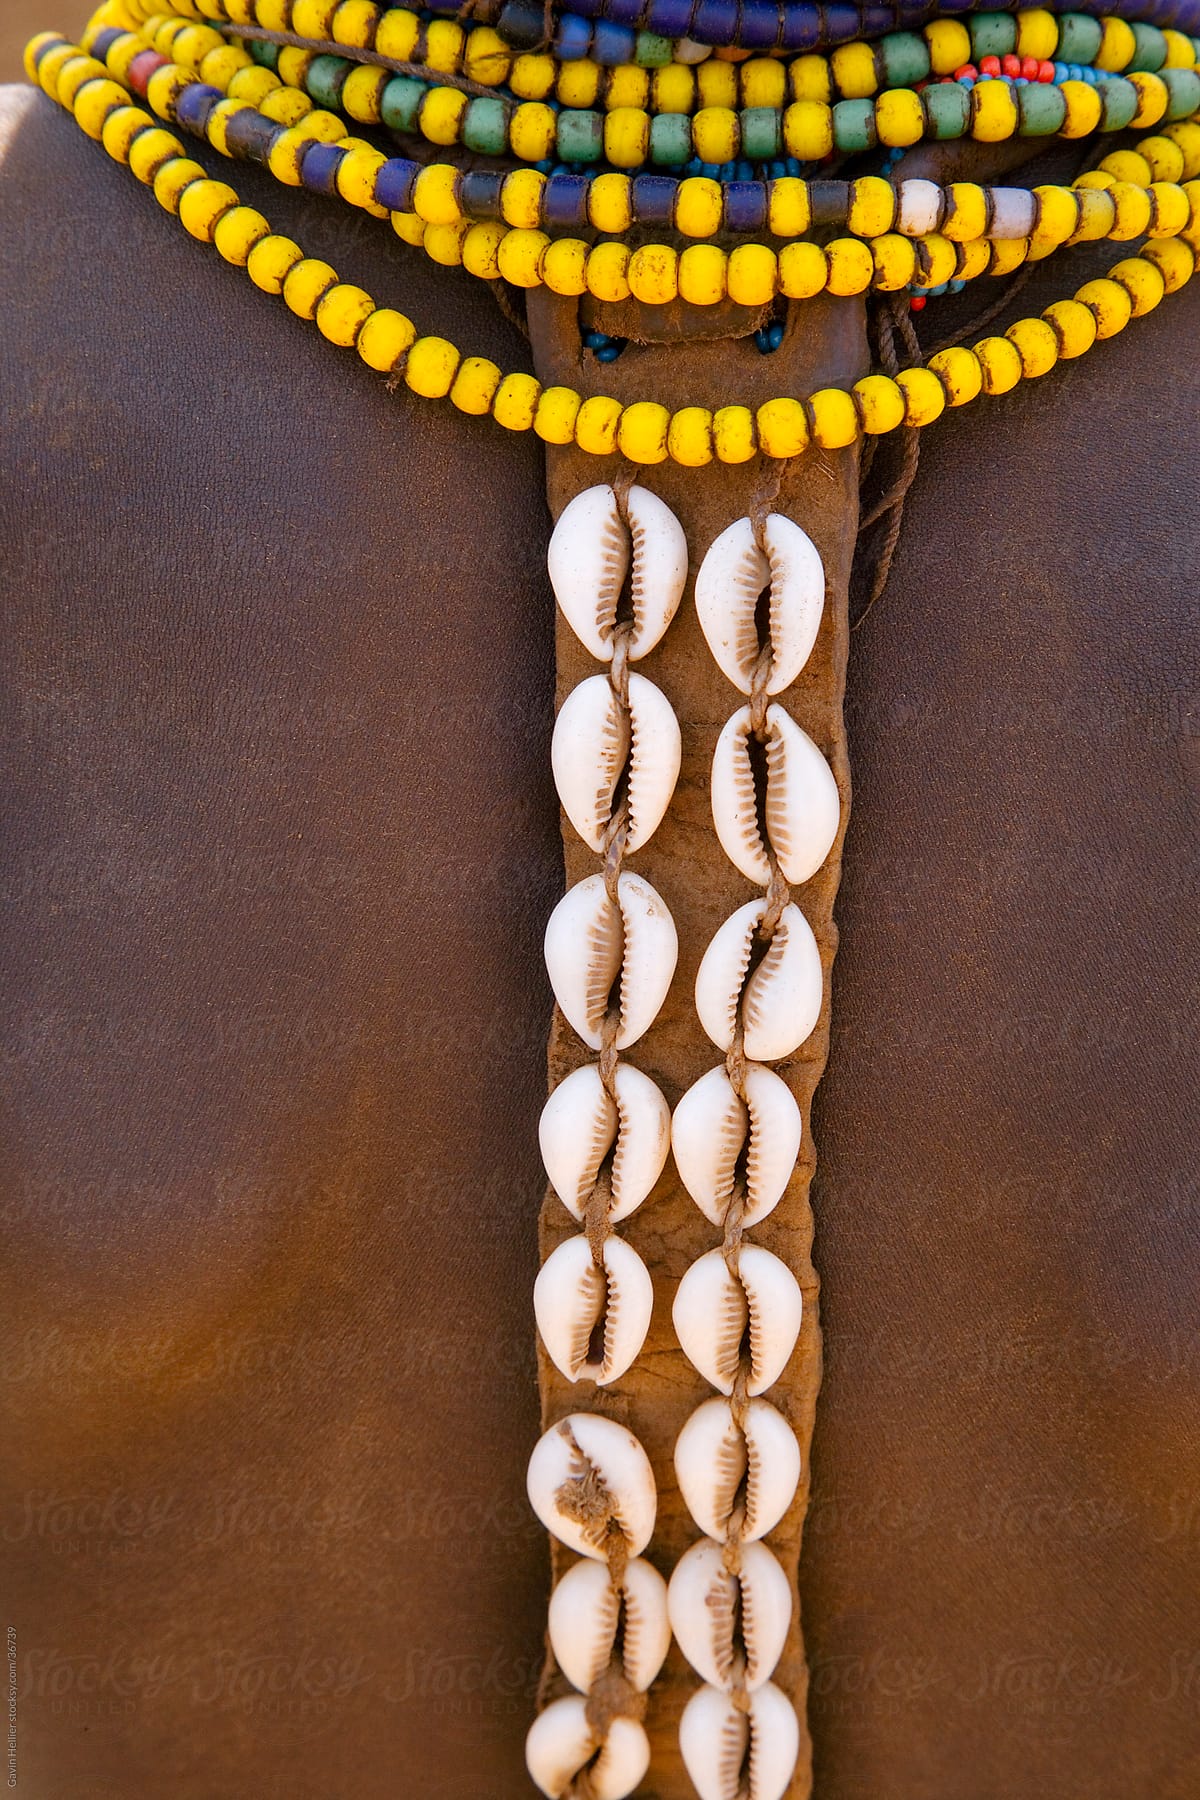 Cowry shells and colourful beads as body decoration (detail), Galeb Tribe, Lower Omo Valley, Ethiopia, Africa